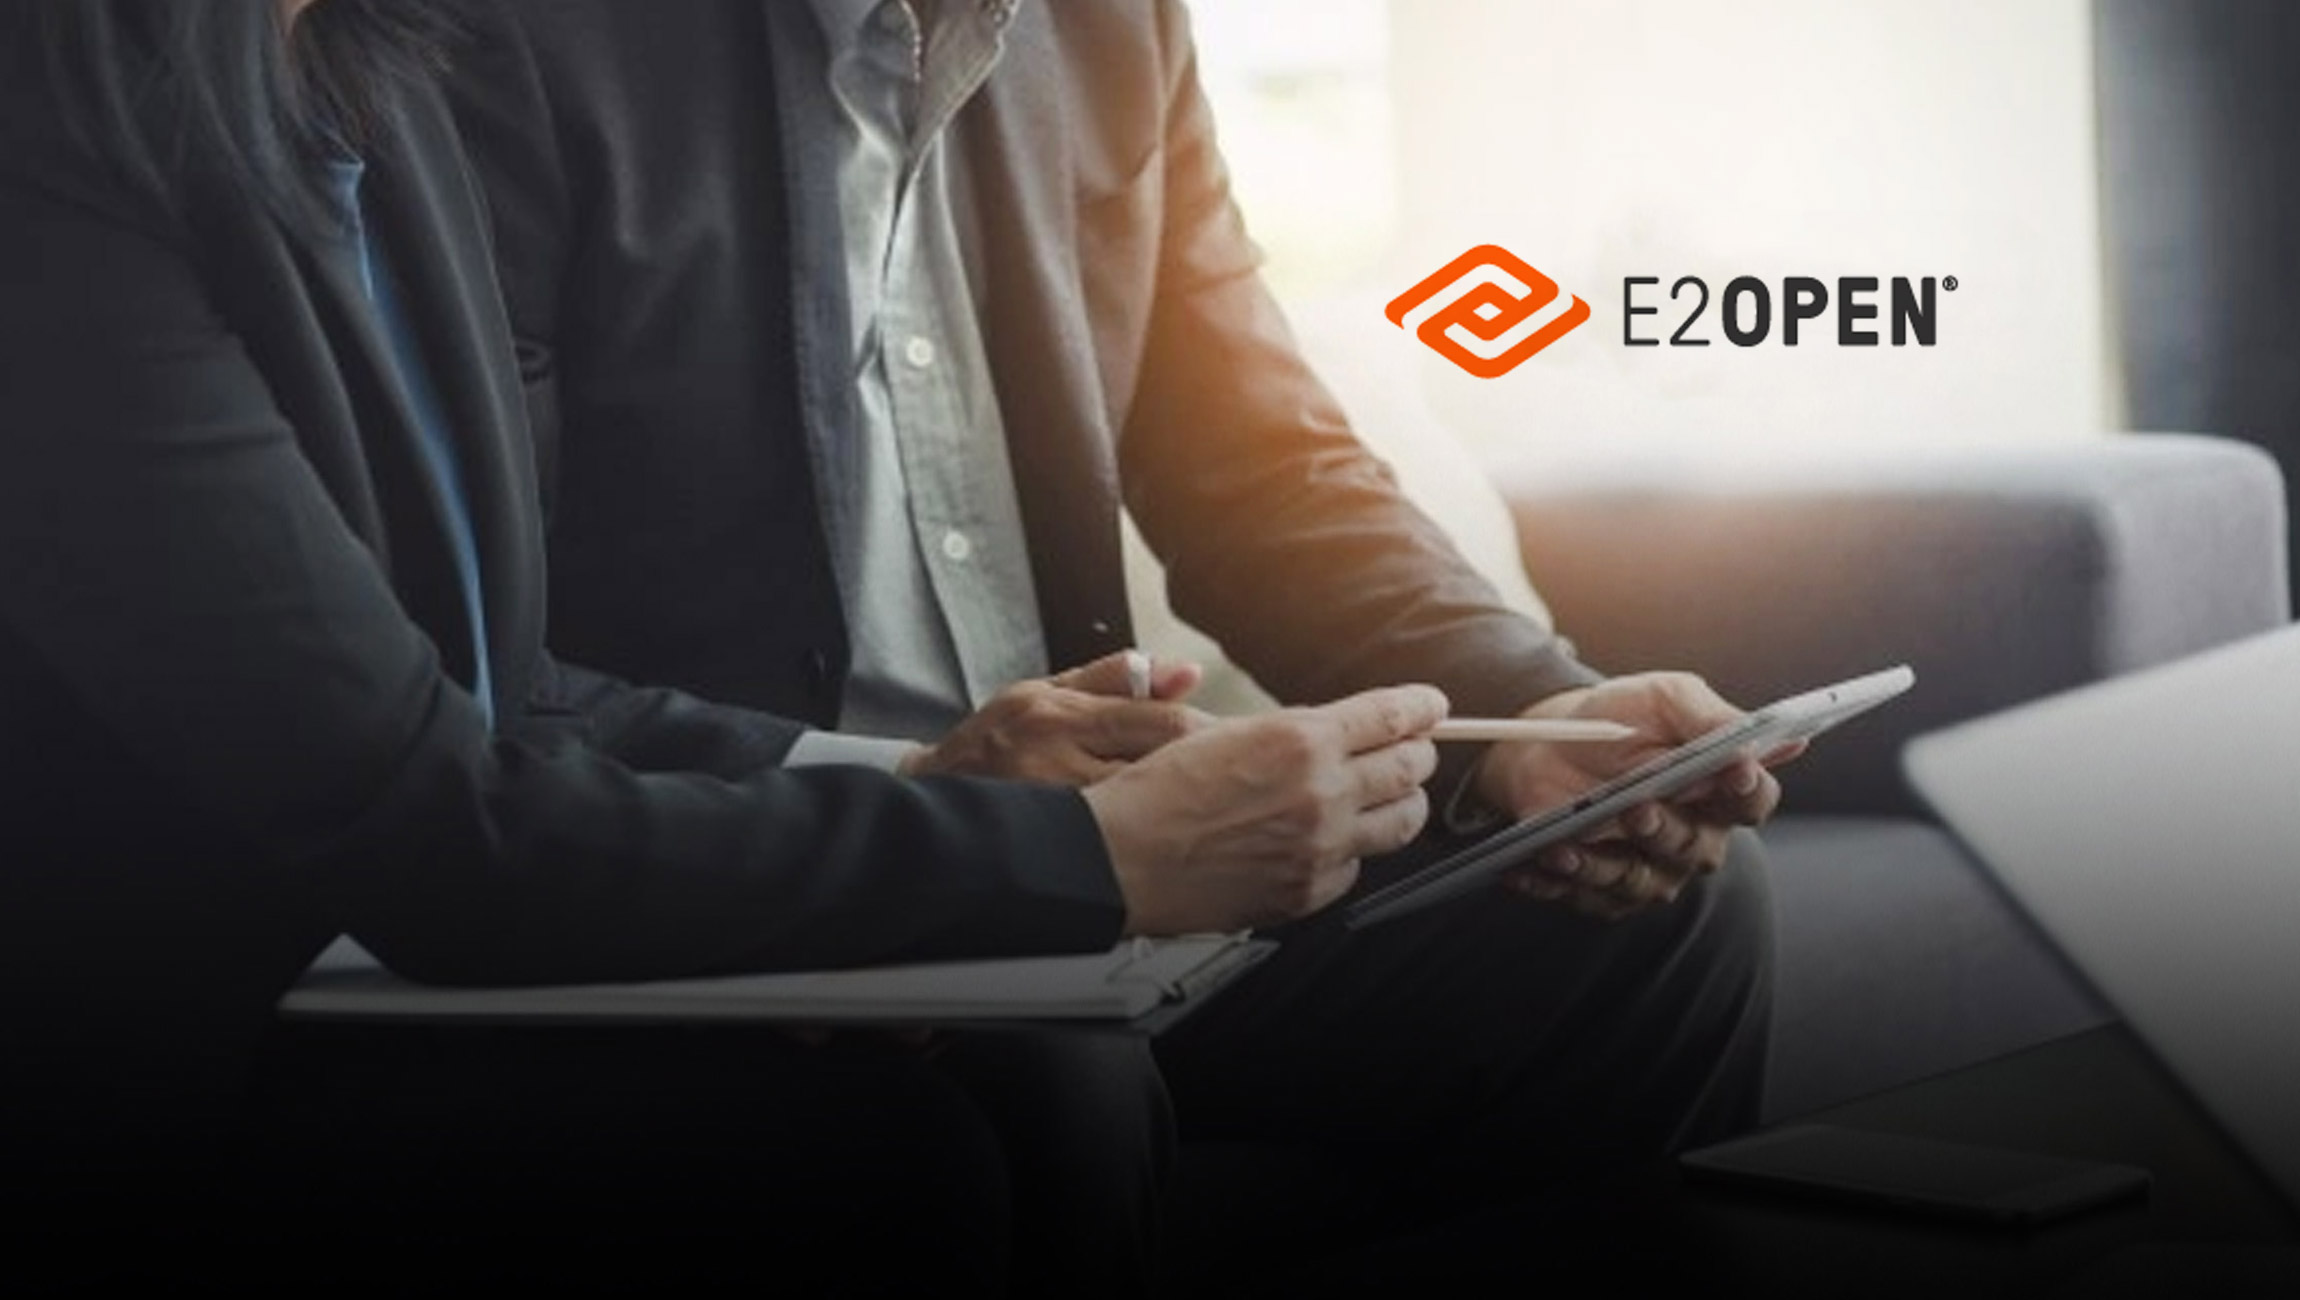 E2open is Quarterly Technology Update Delivers Advancements to Boost Clients’ Productivity and Improve Compliance and Connected Decision-Making Across All Supply Chain Tiers